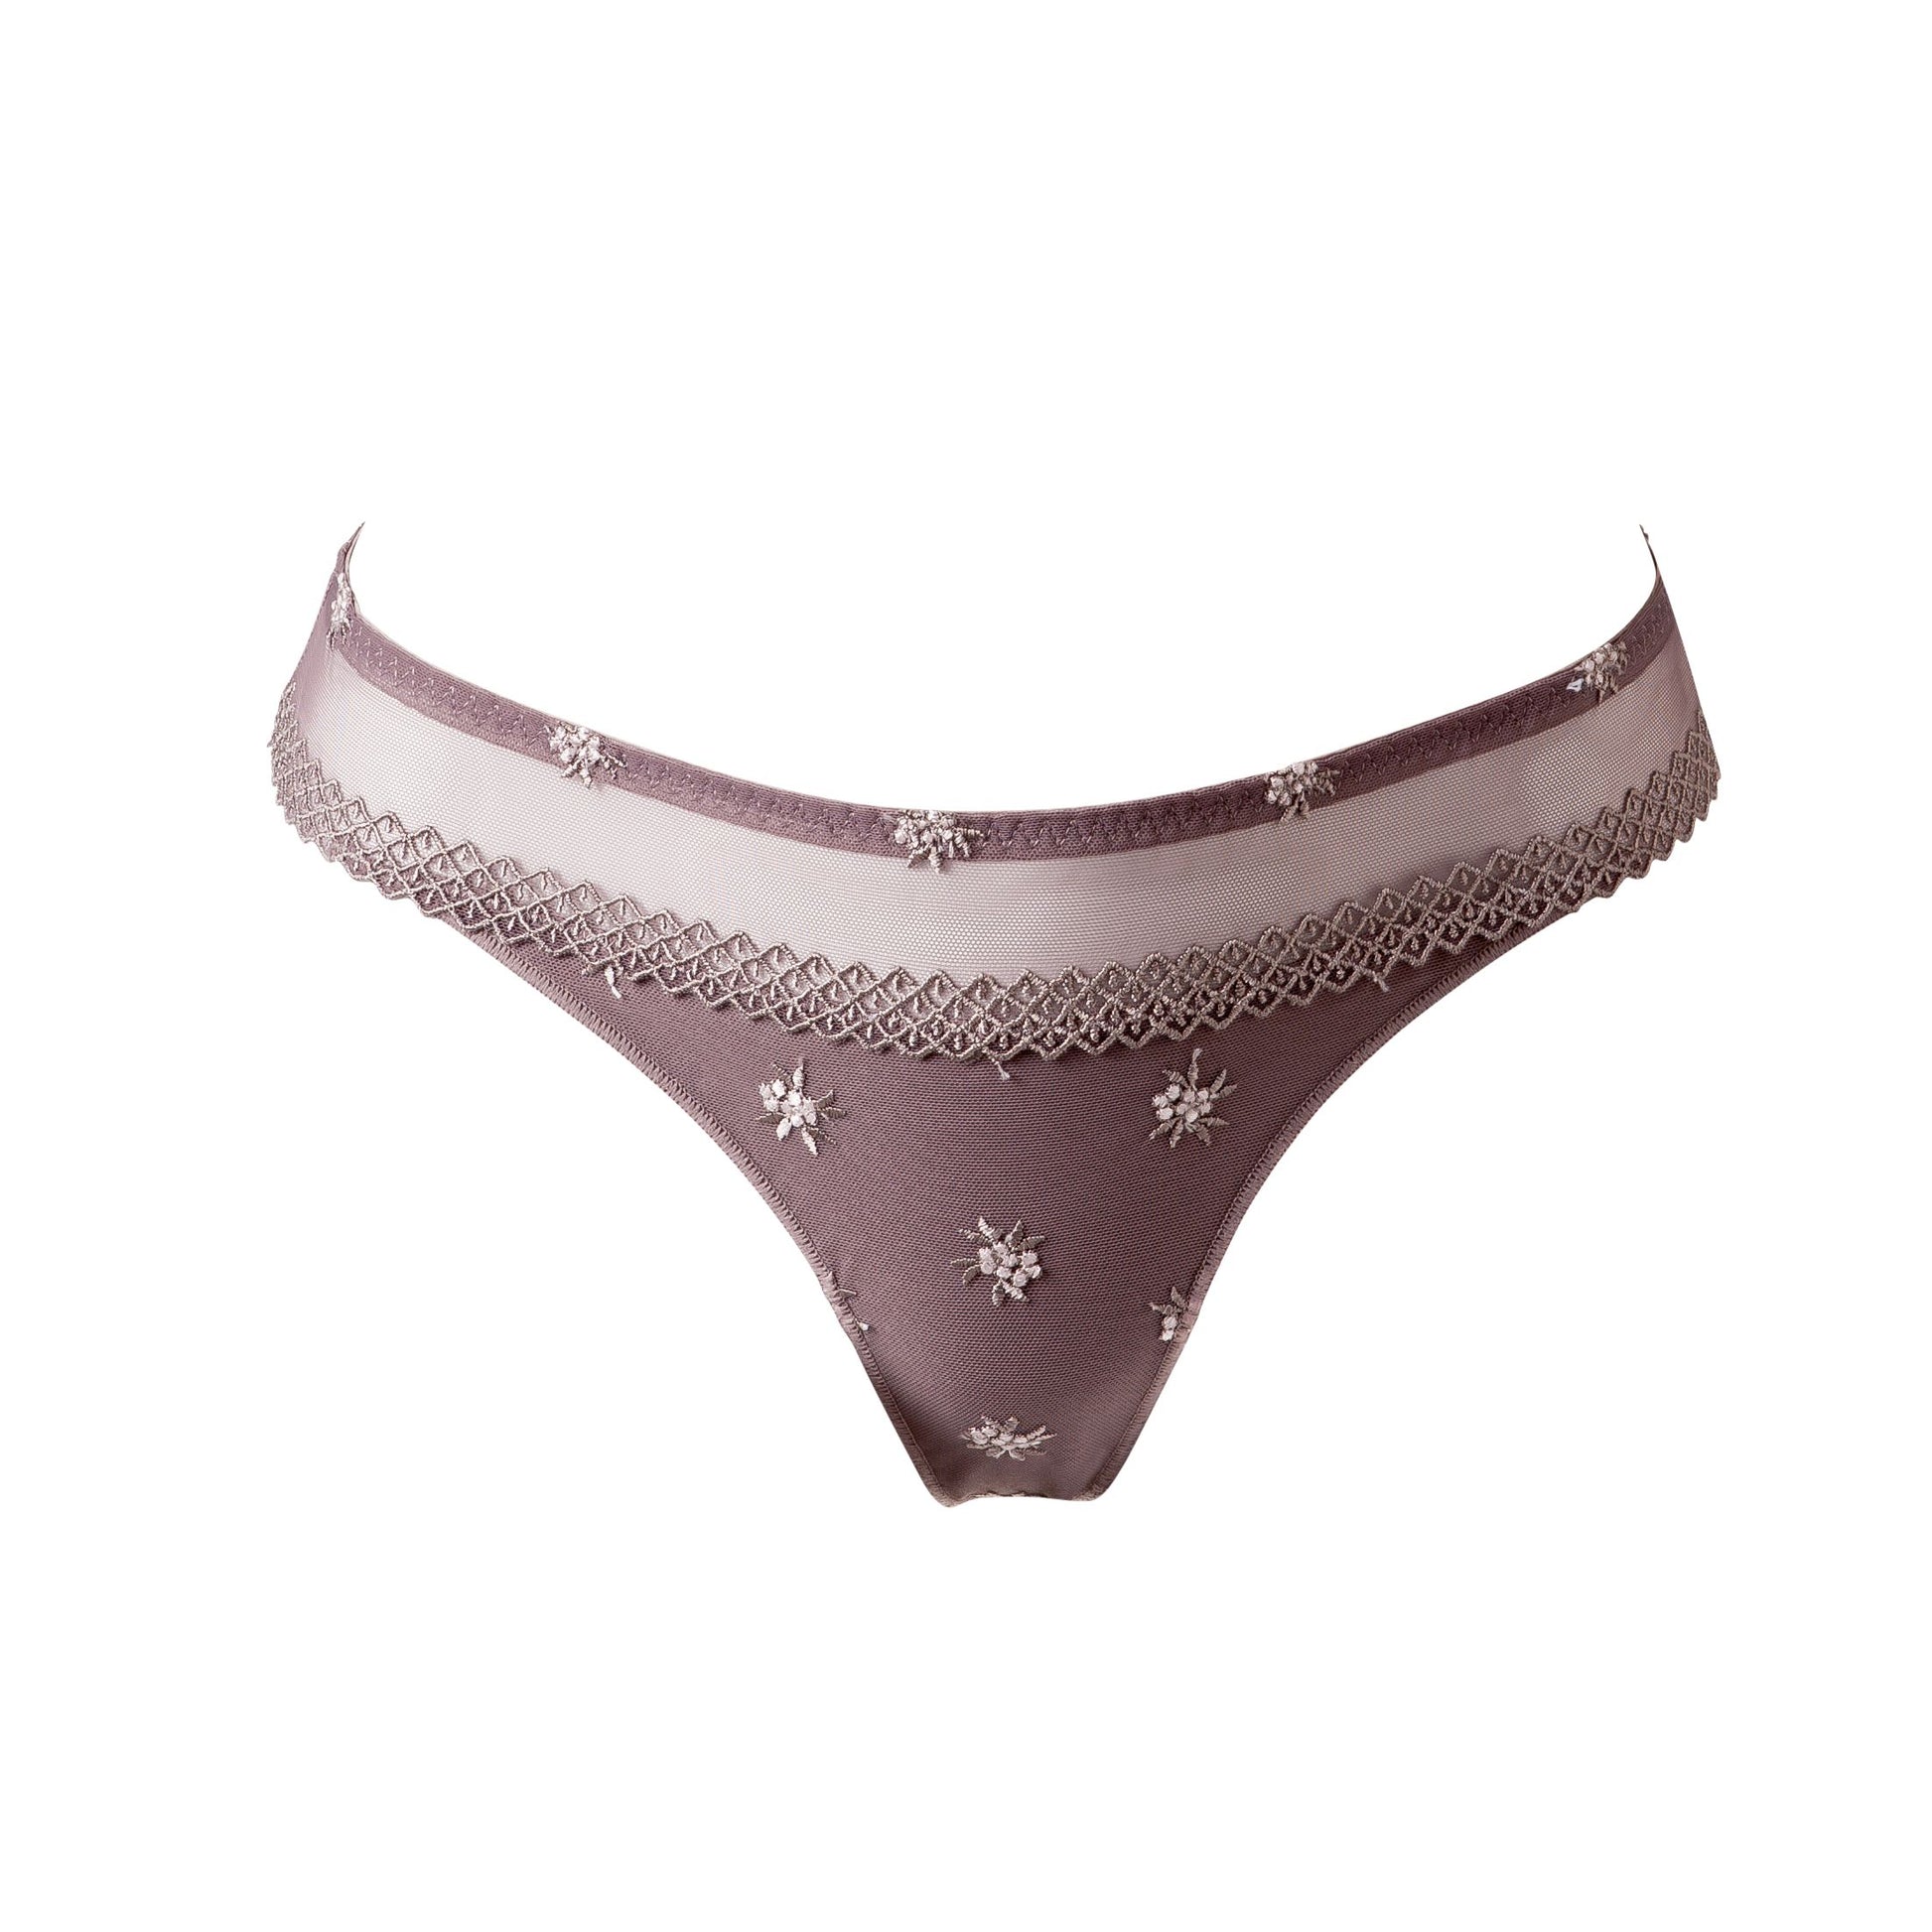 The Chantilly line by Louisa Bracq thong features a geometric border-line complemented by shimmering iridescent medallions, providing a sophisticated and refined air. 